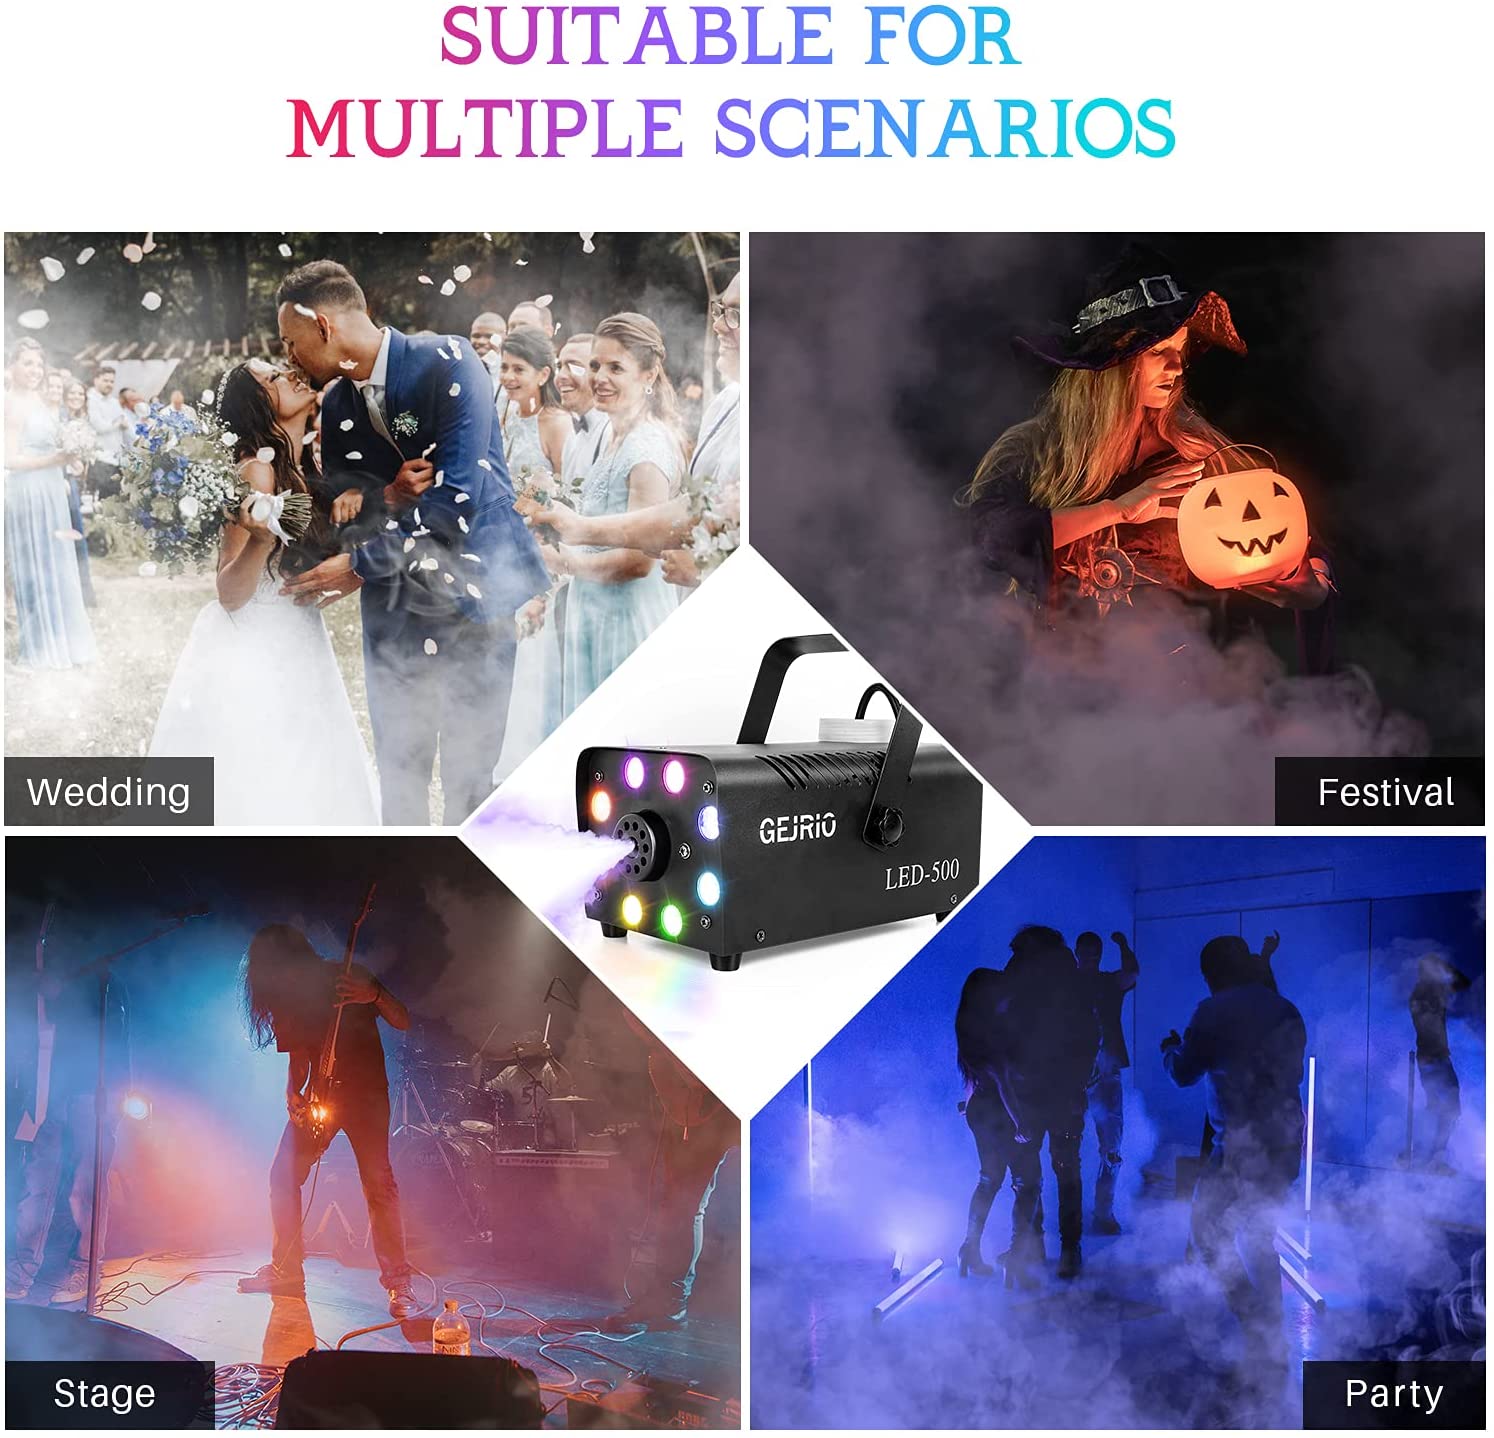 GEJRIO Fog Machine, 500W Smoke Machine with 16 Color Controllable Lights Effect, Wireless and Wired Remote Control with Preheating Light Indicator for Weddings, Halloween, Parties & Stage-Black